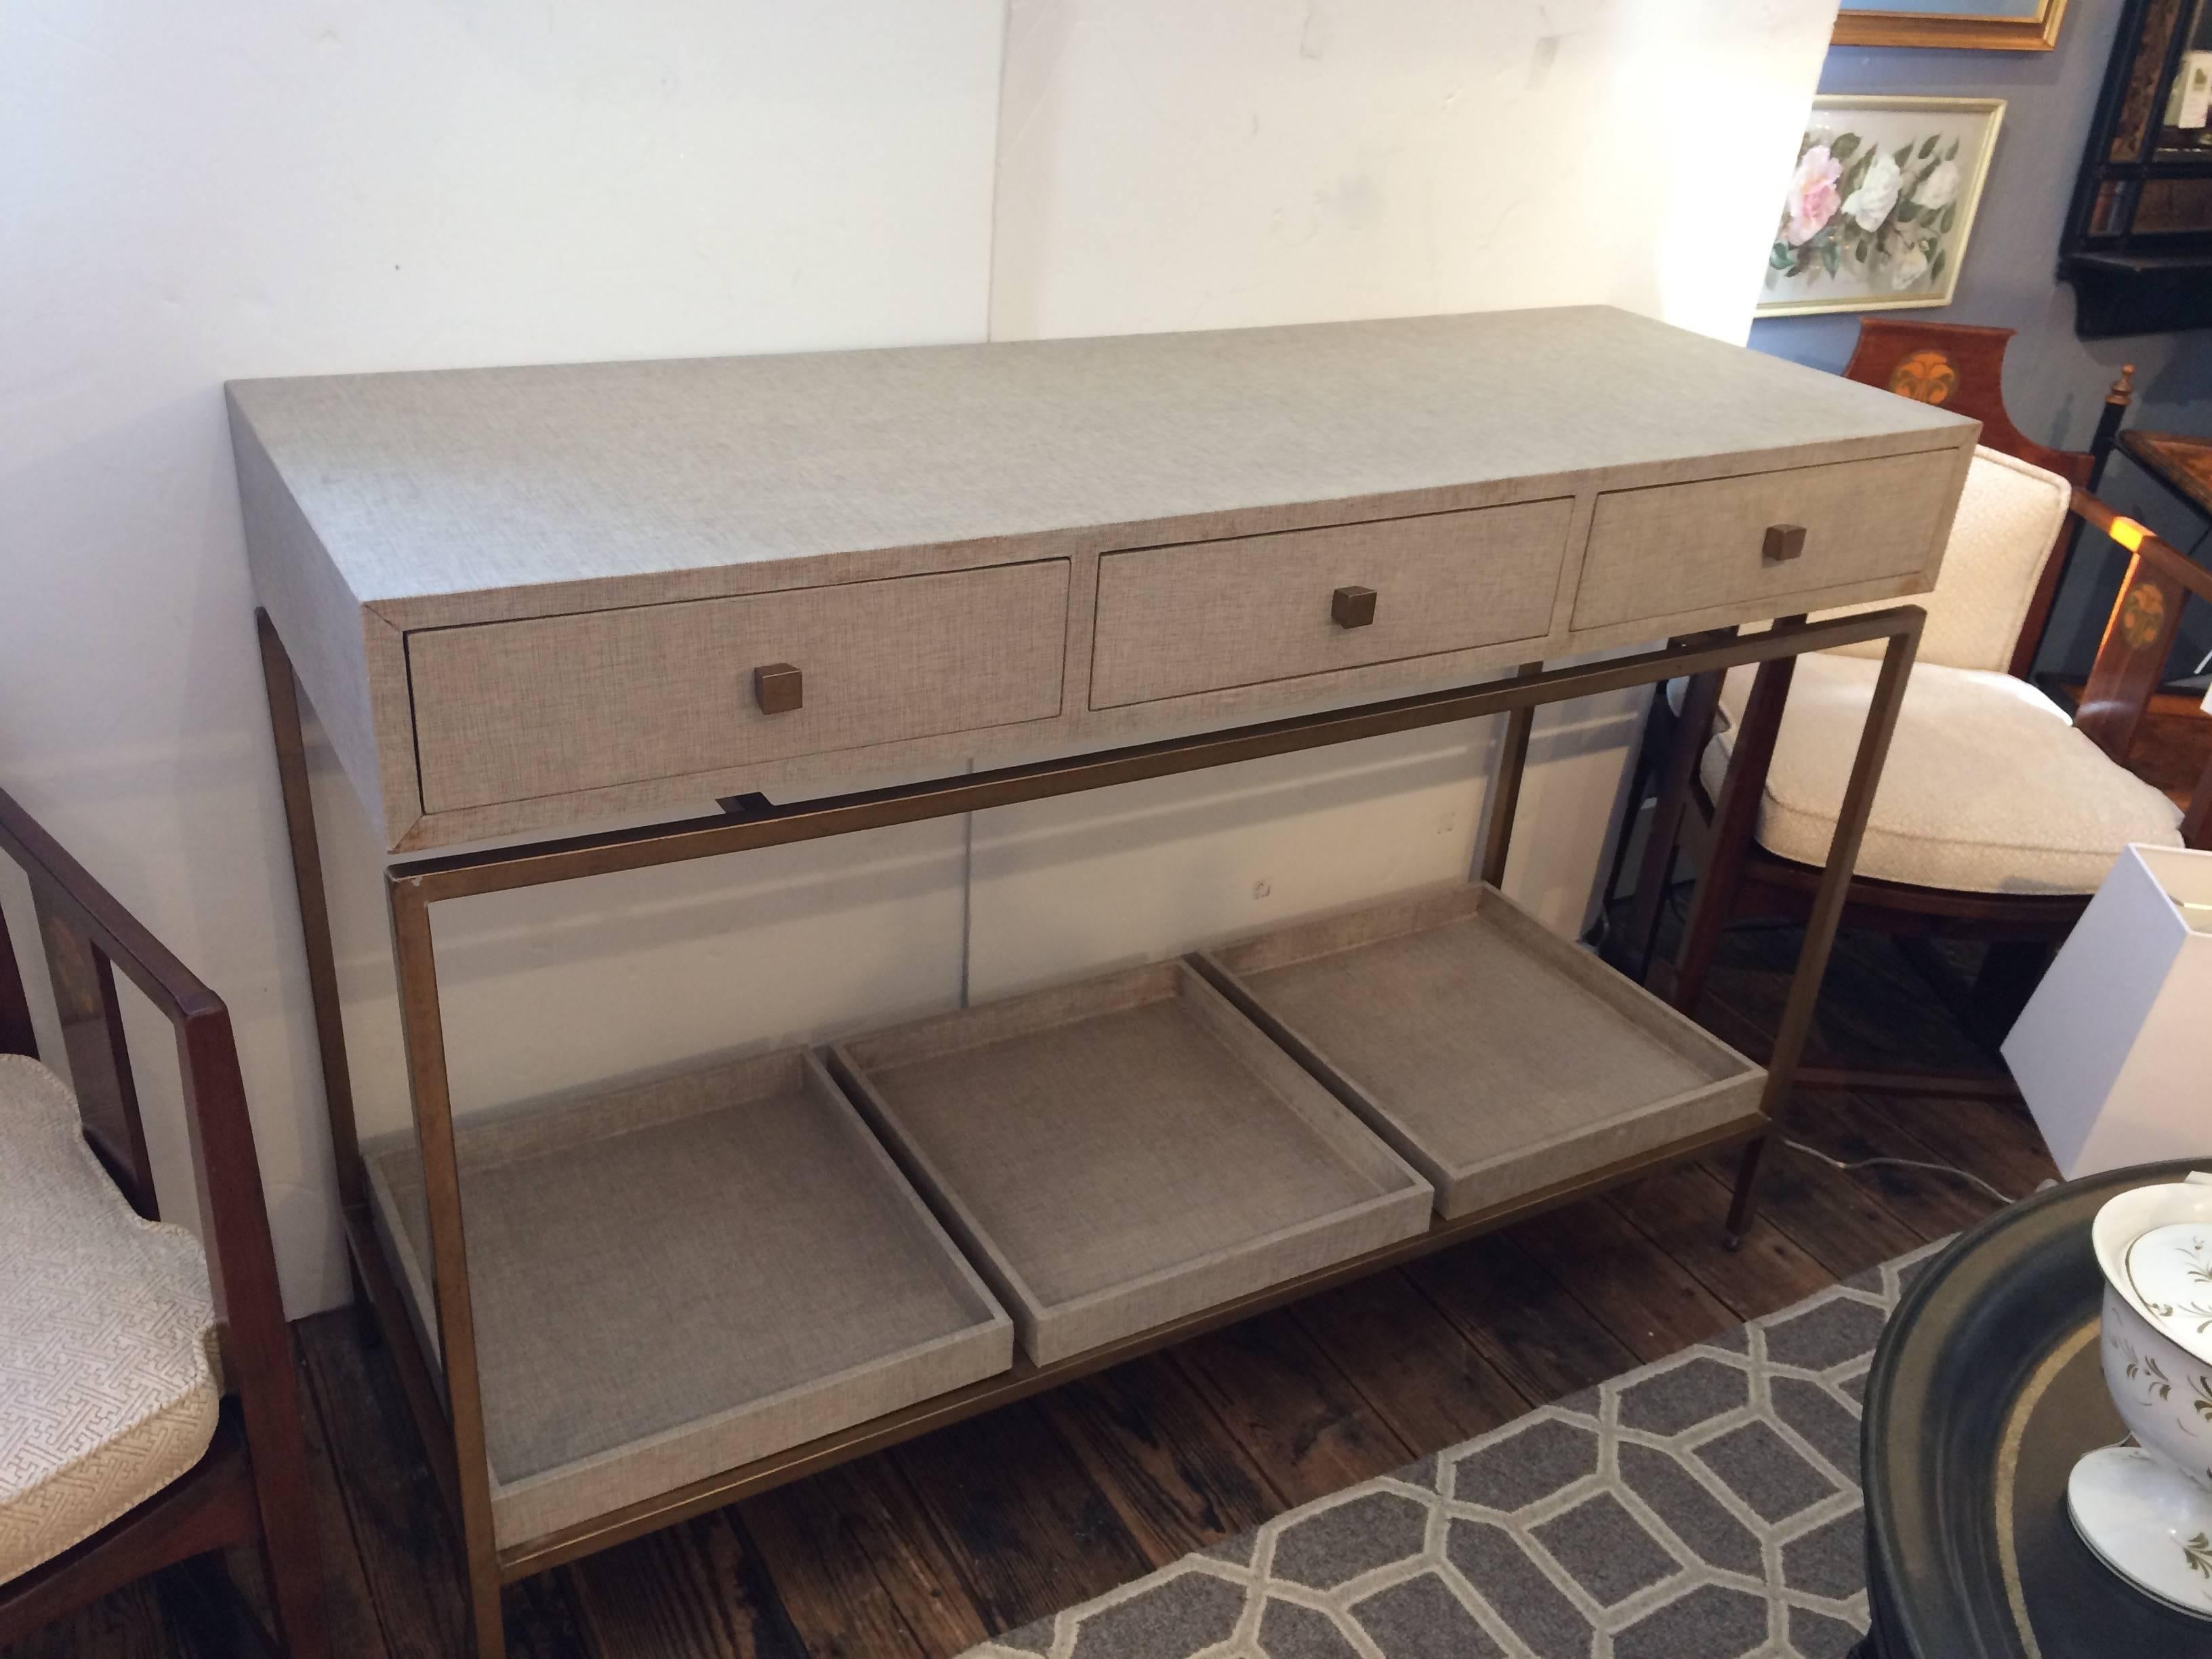 A great looking contemporary console covered in a neutral greyish beige linen (or fabric like linen) offset stylishly with gold metal base and knobs on the three drawers. A row of three removable trays make up the bottom tier.